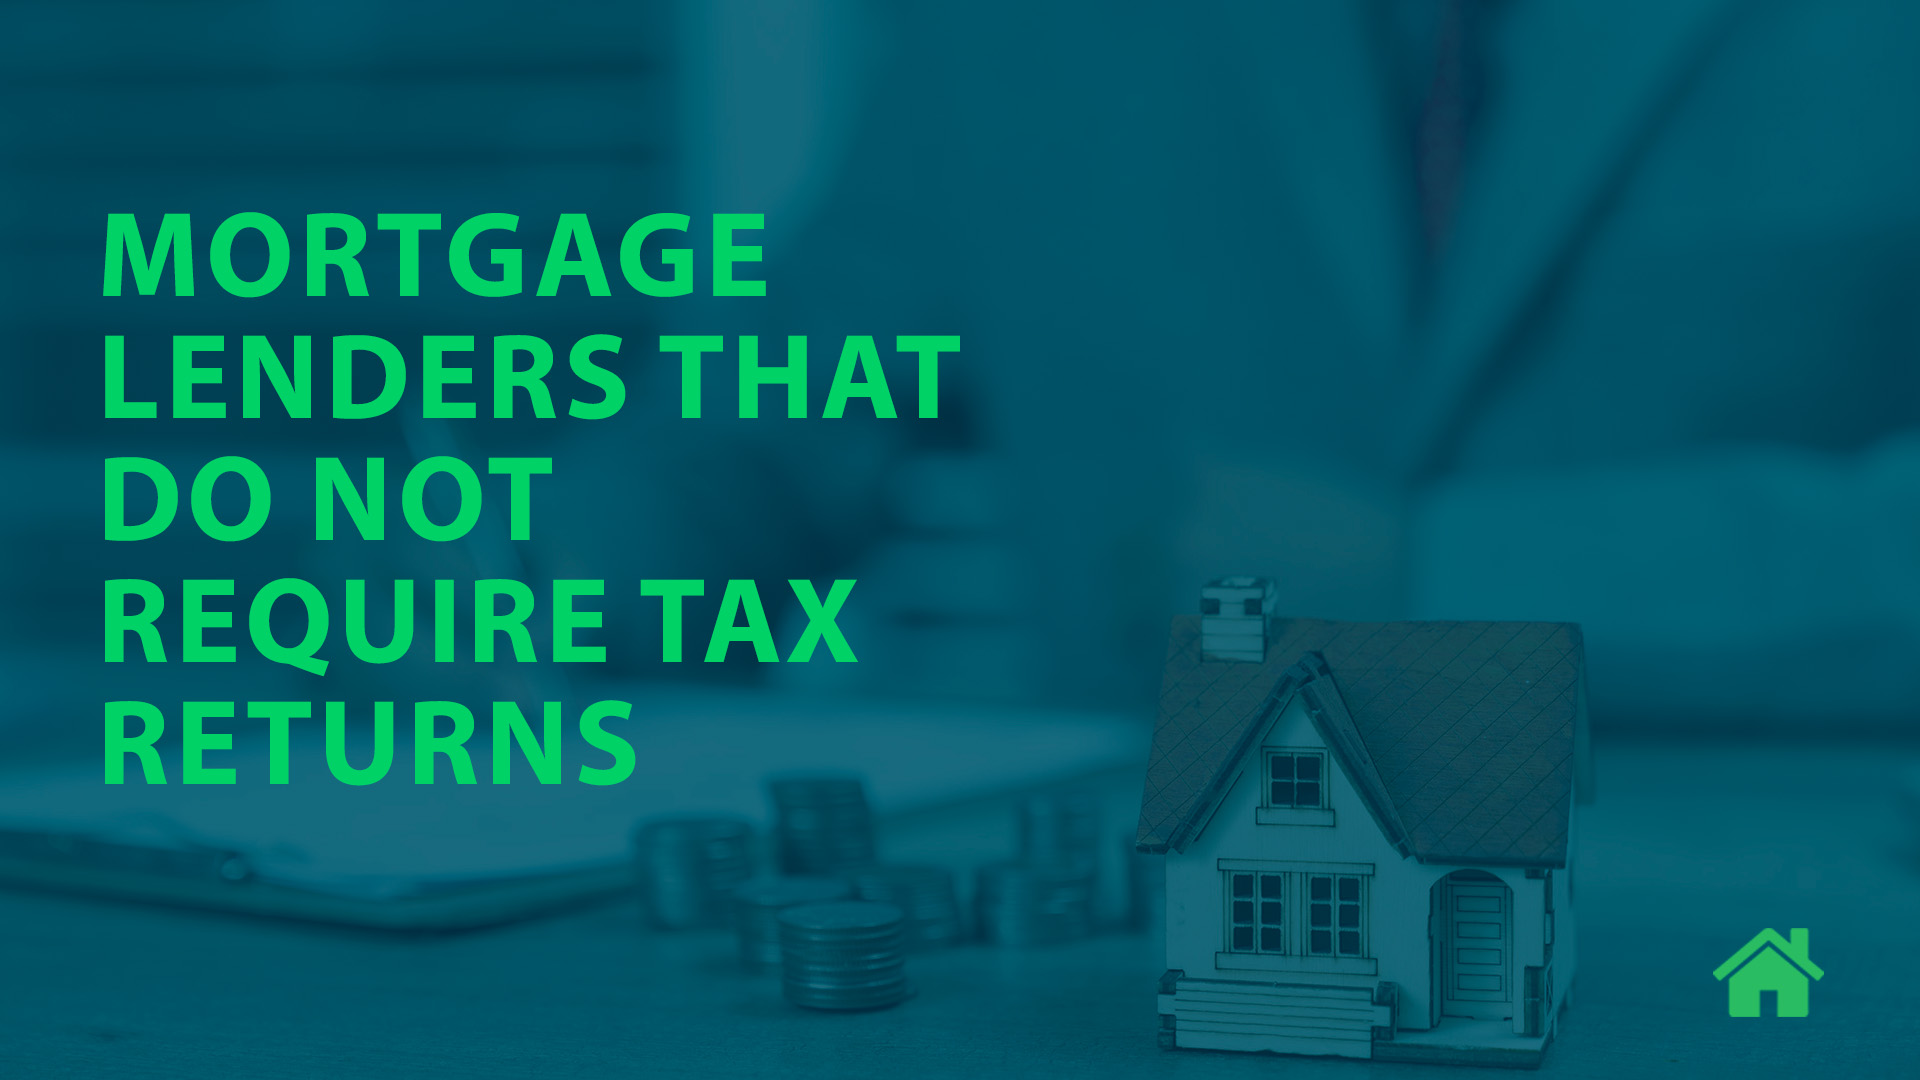 Mortgage Lenders That Do Not Require Tax Returns